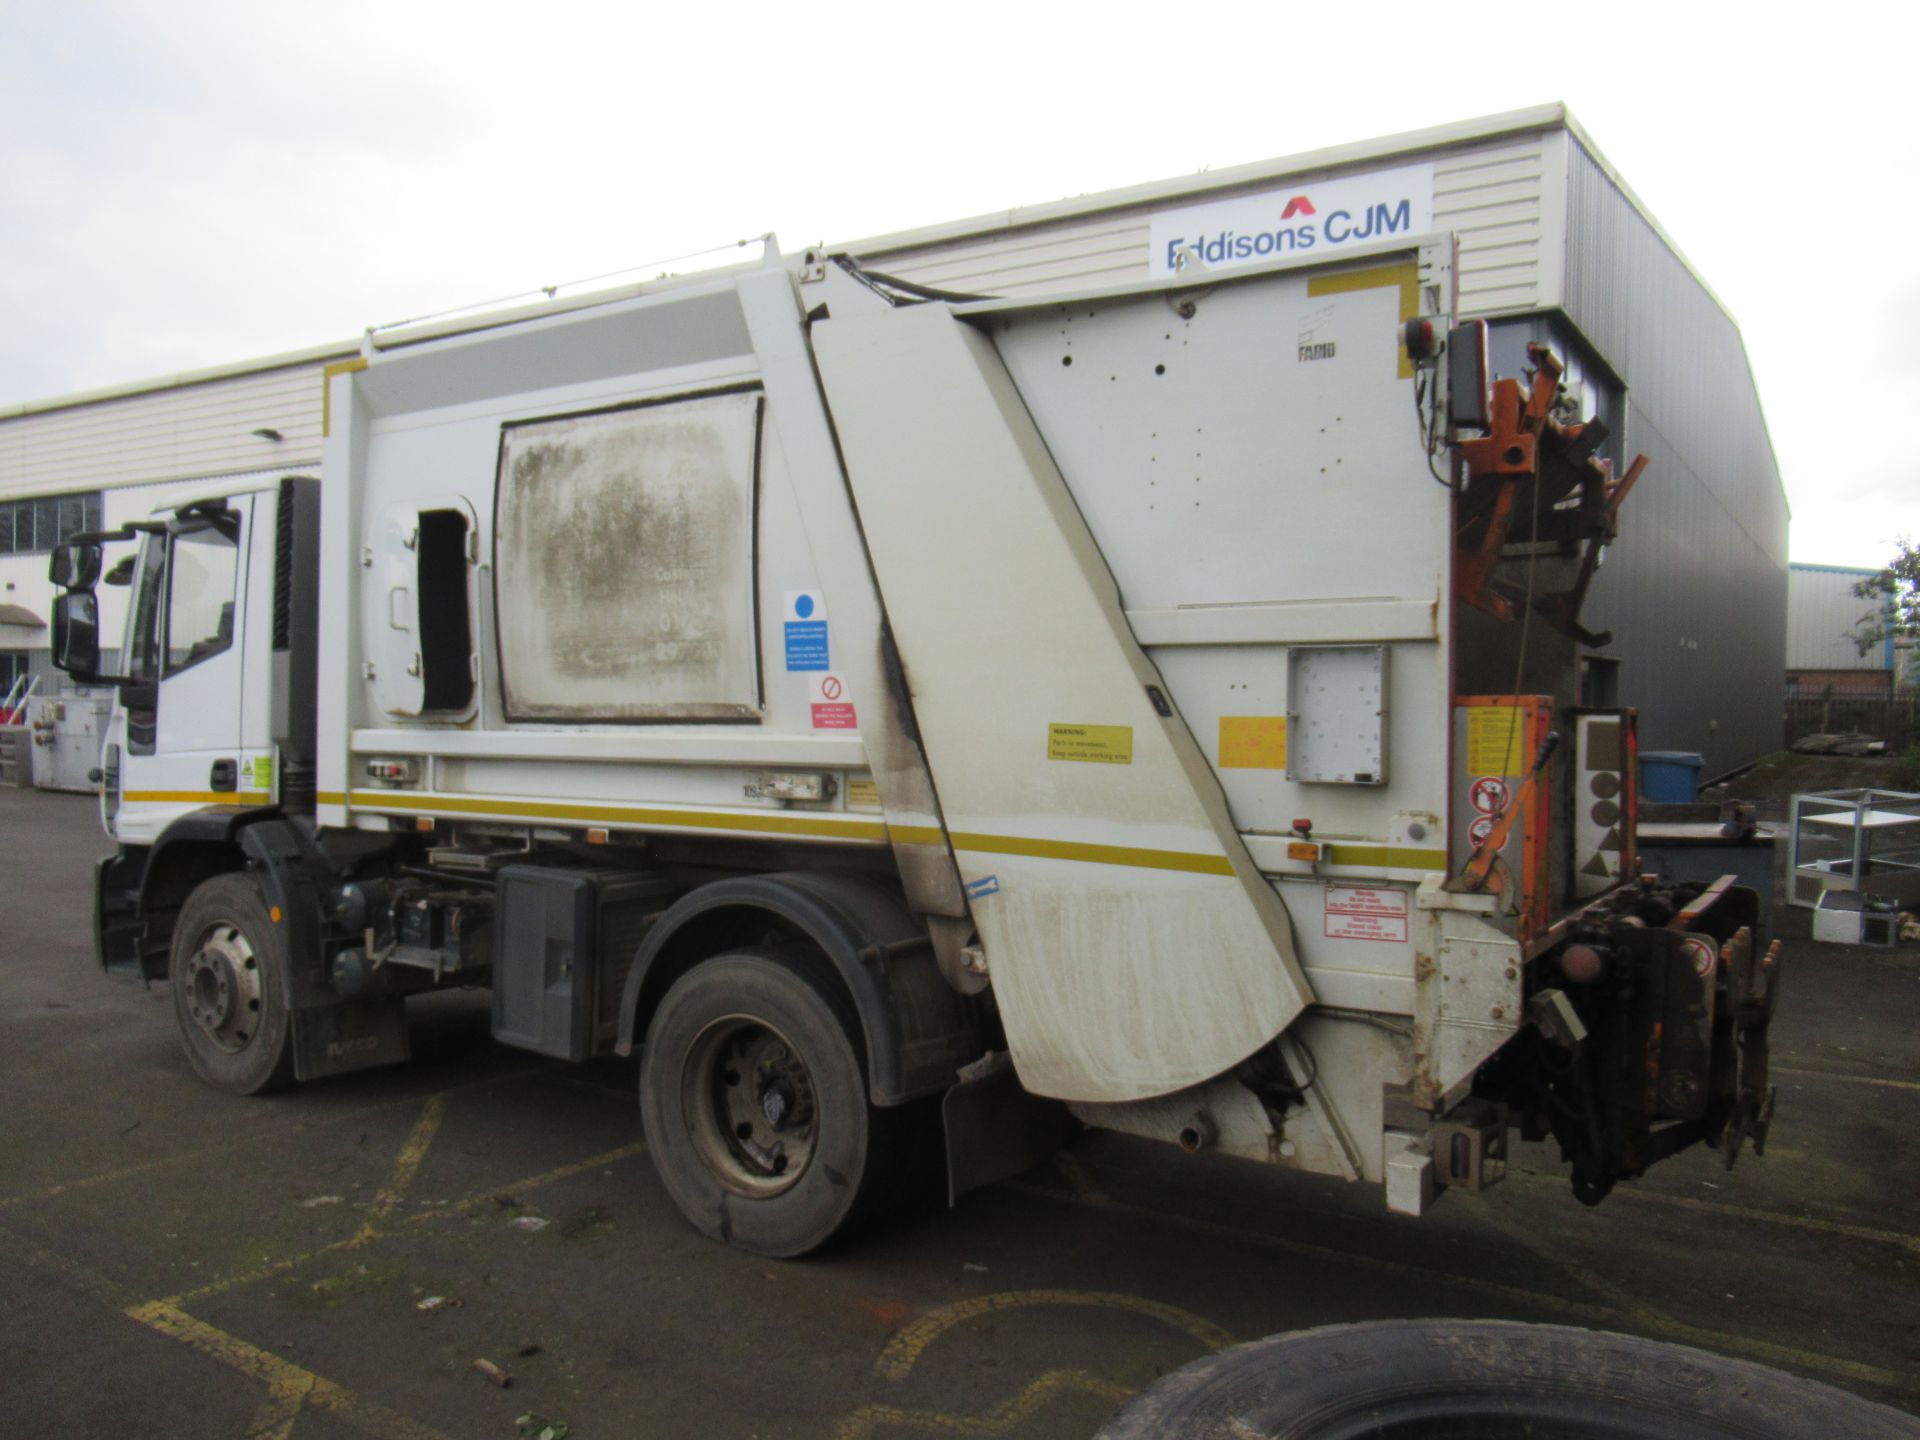 2013 WHITE IVECO EUROCARGO (MY 2008) Refuse Collection Vehicle - Image 4 of 12